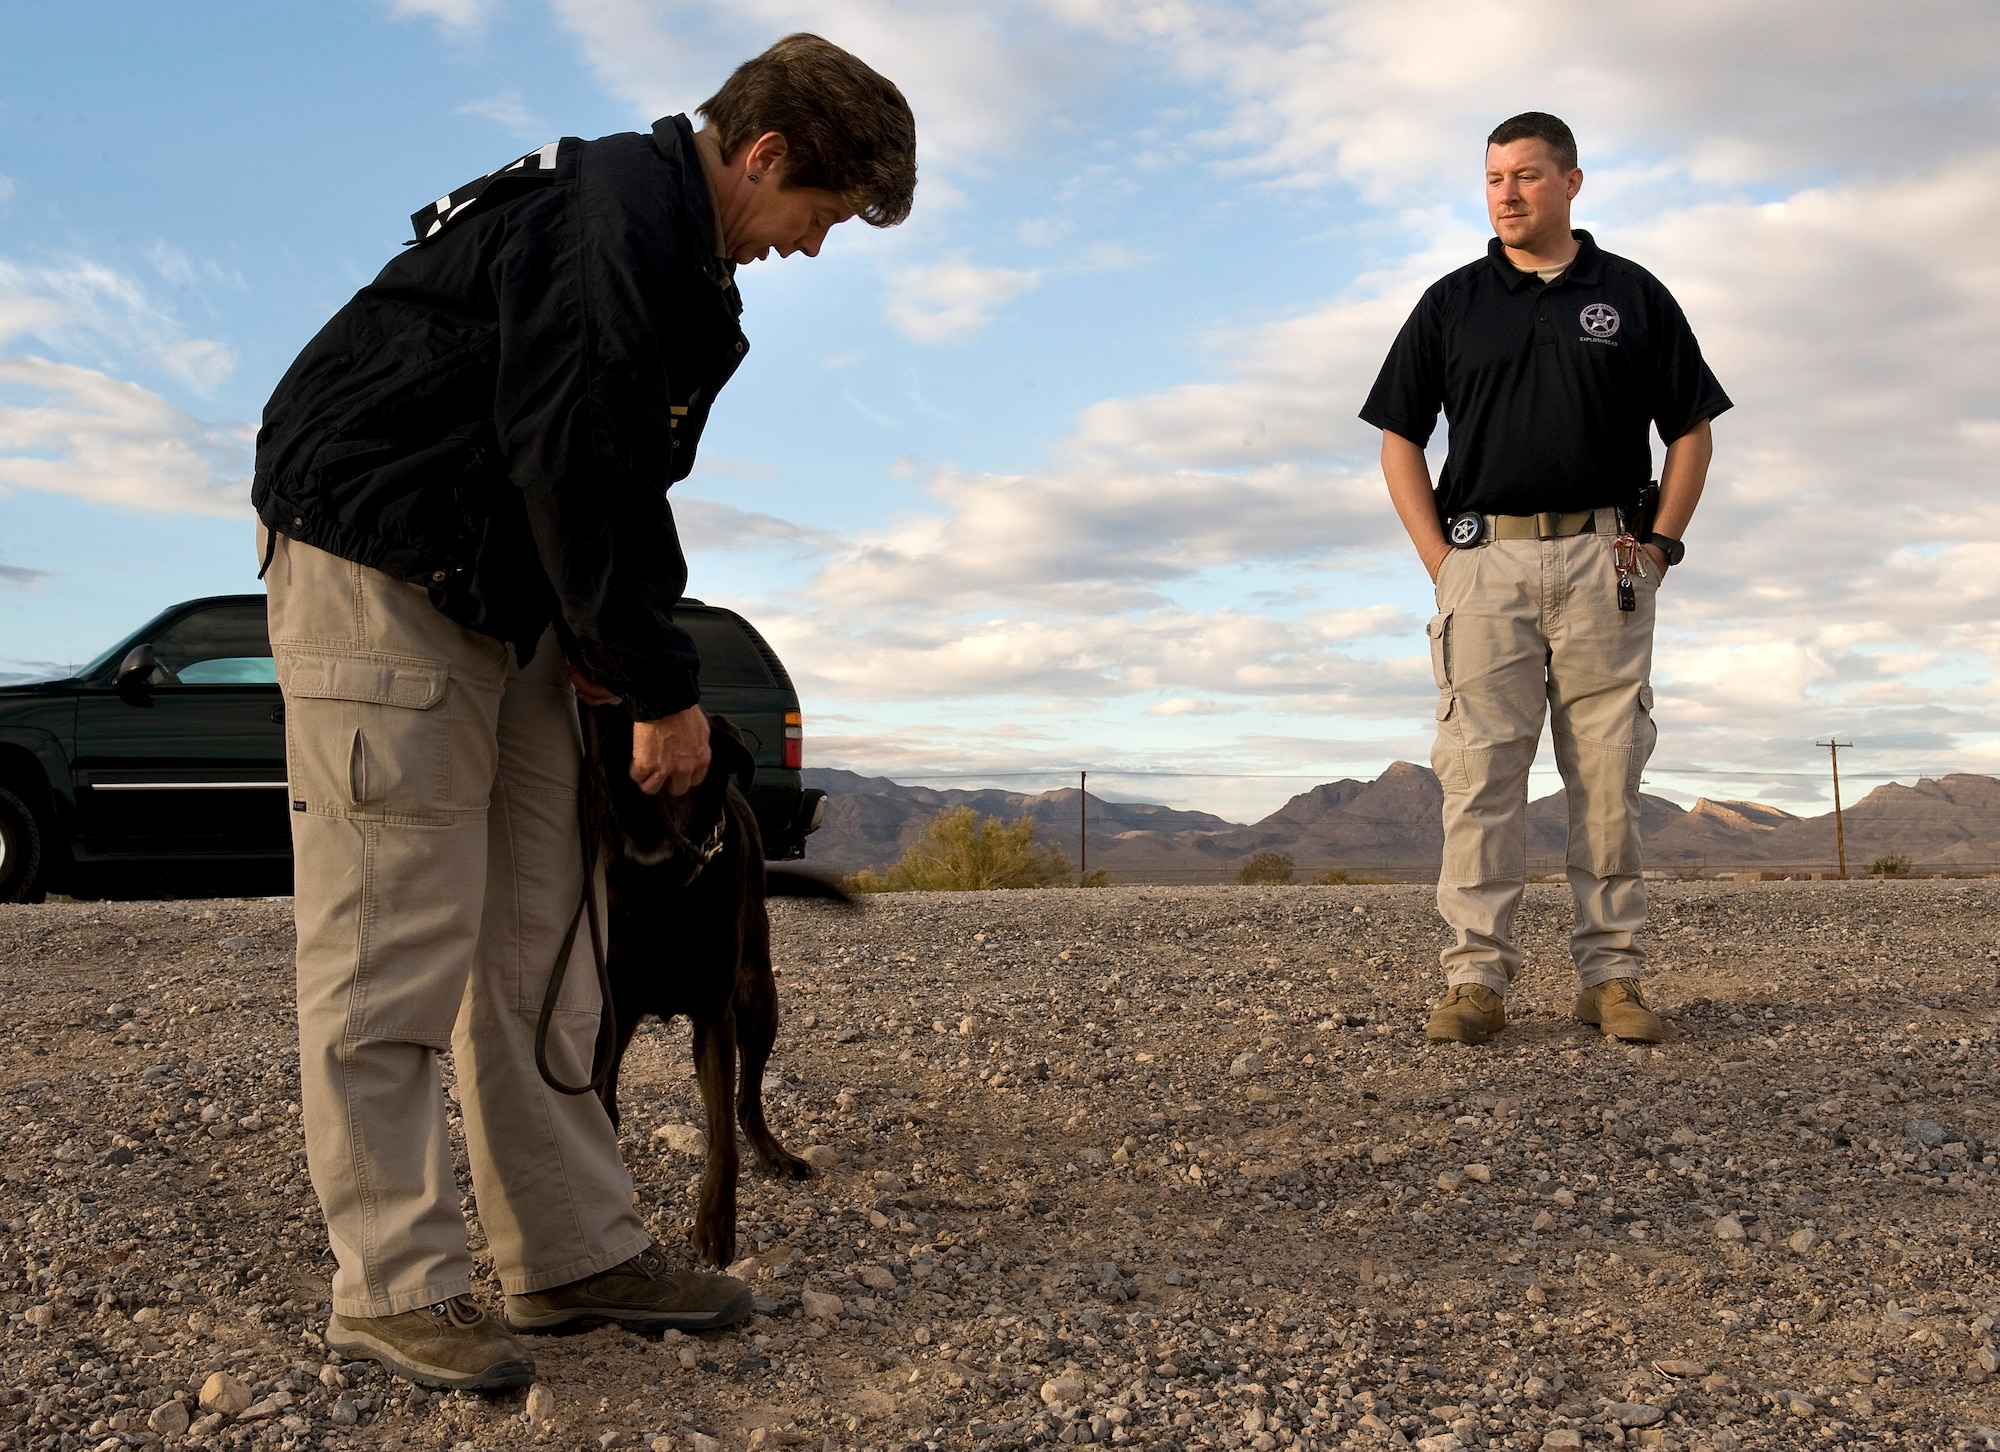 NELLIS AIR FORCE BASE, Nev.-- Jon A. Minnich, a U.S. Marshals Service explosive detection canine handler, discusses different explosive odor combinations with Lauren Marakas, senior special agent canine handler from the Bureau of Alcohol, Tobacco, Firearms, and Explosives, while petting Ruthie, an explosives detection canine, during a joint explosive detection training exercise Dec. 16. Military working dog handlers from the 99th Security Forces Squadron worked with 25 canine teams from the Las Vegas area. (U.S. Air Force photo by Senior Airman Brett Clashman)